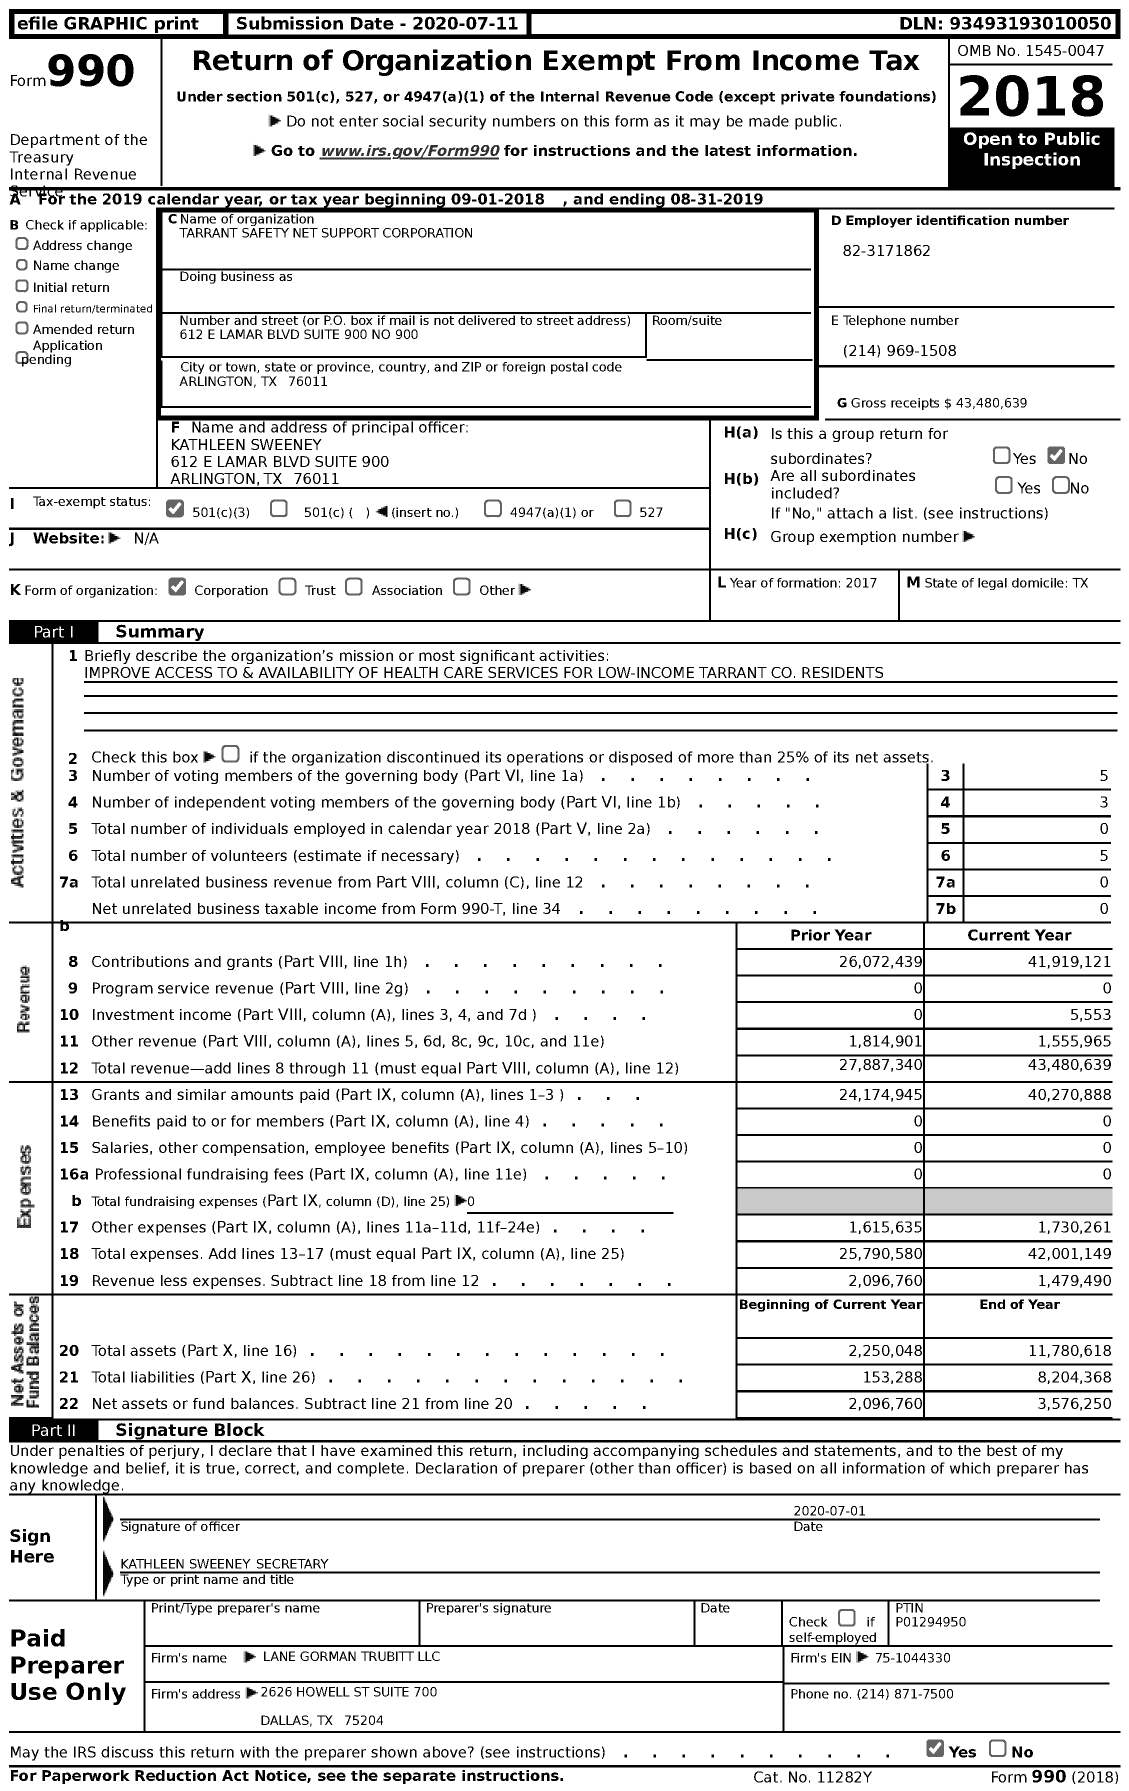 Image of first page of 2018 Form 990 for Tarrant Safety Net Support Corporation